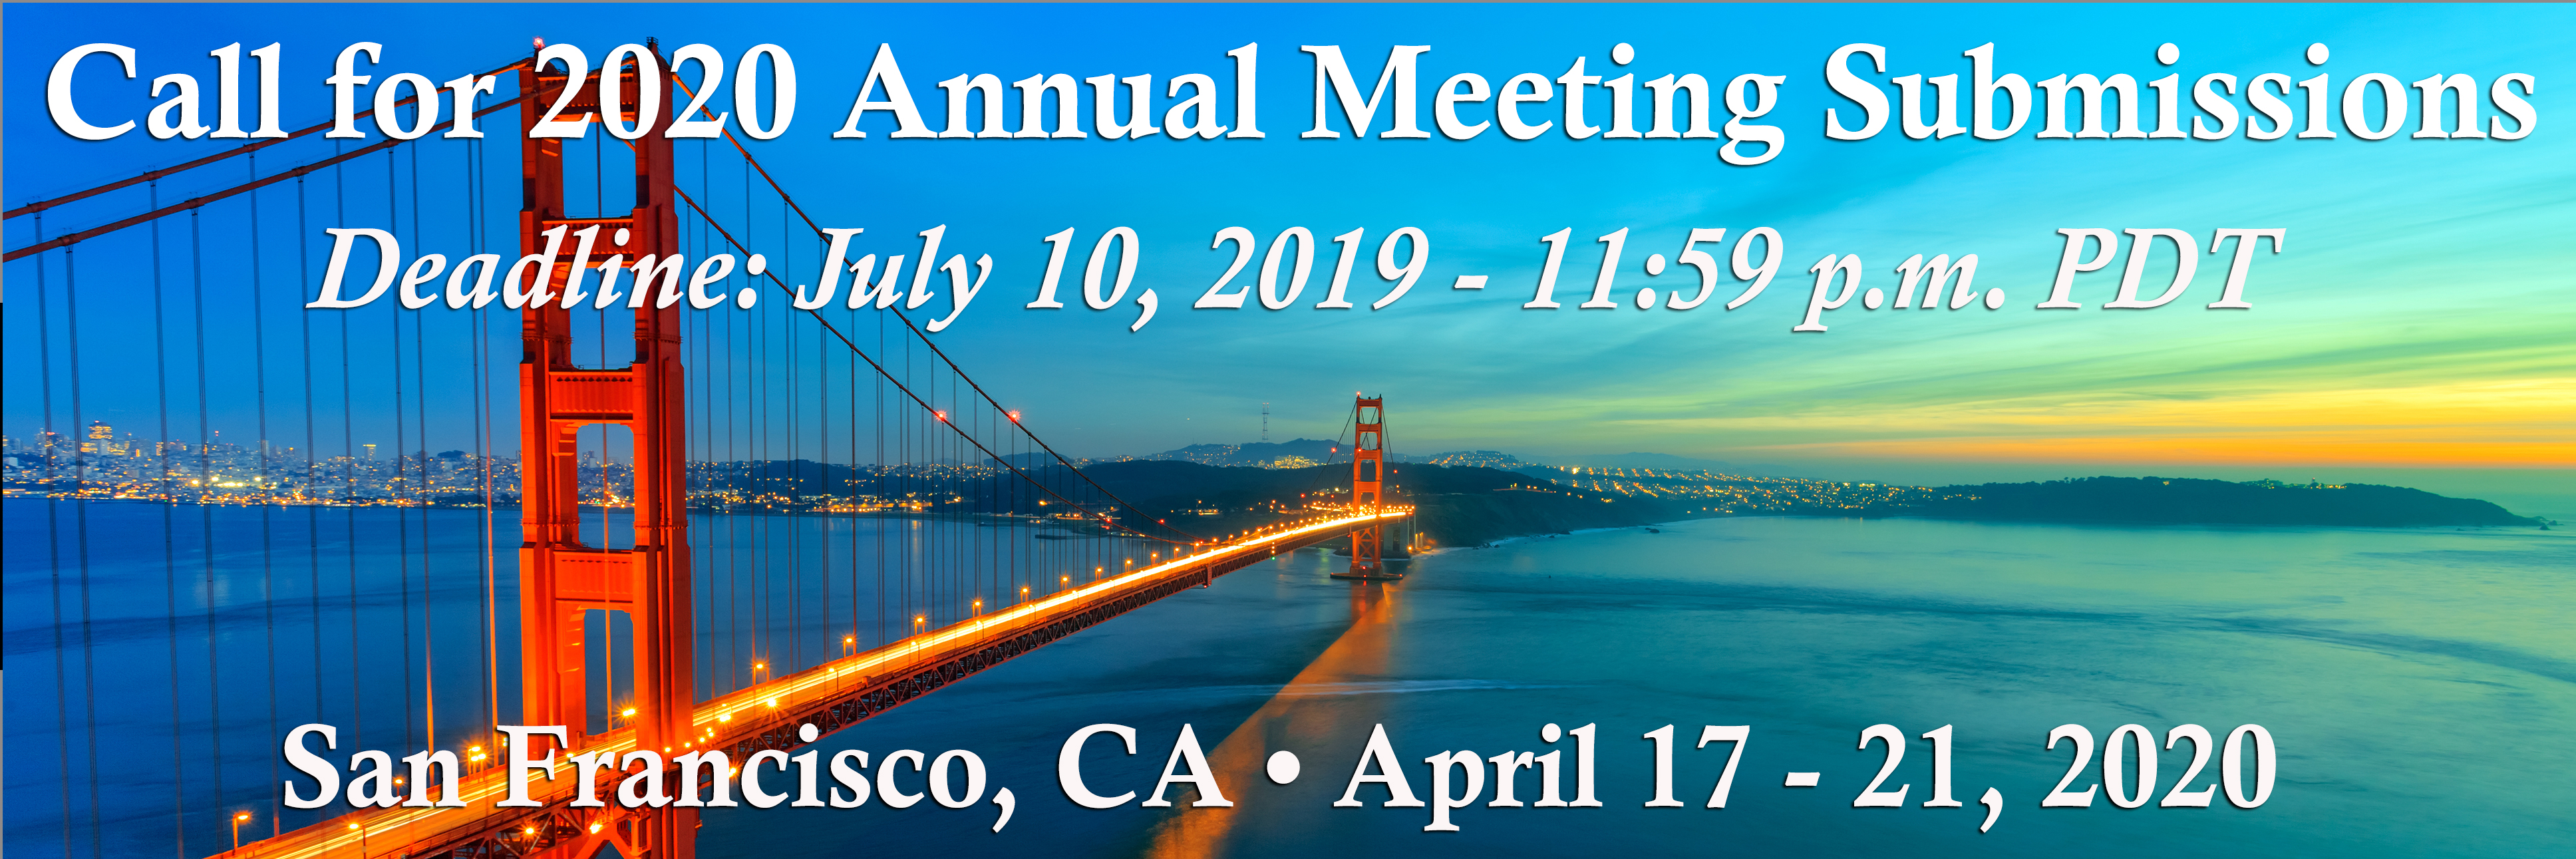 2020 Annual Meeting Call for Paper and Session Submissions